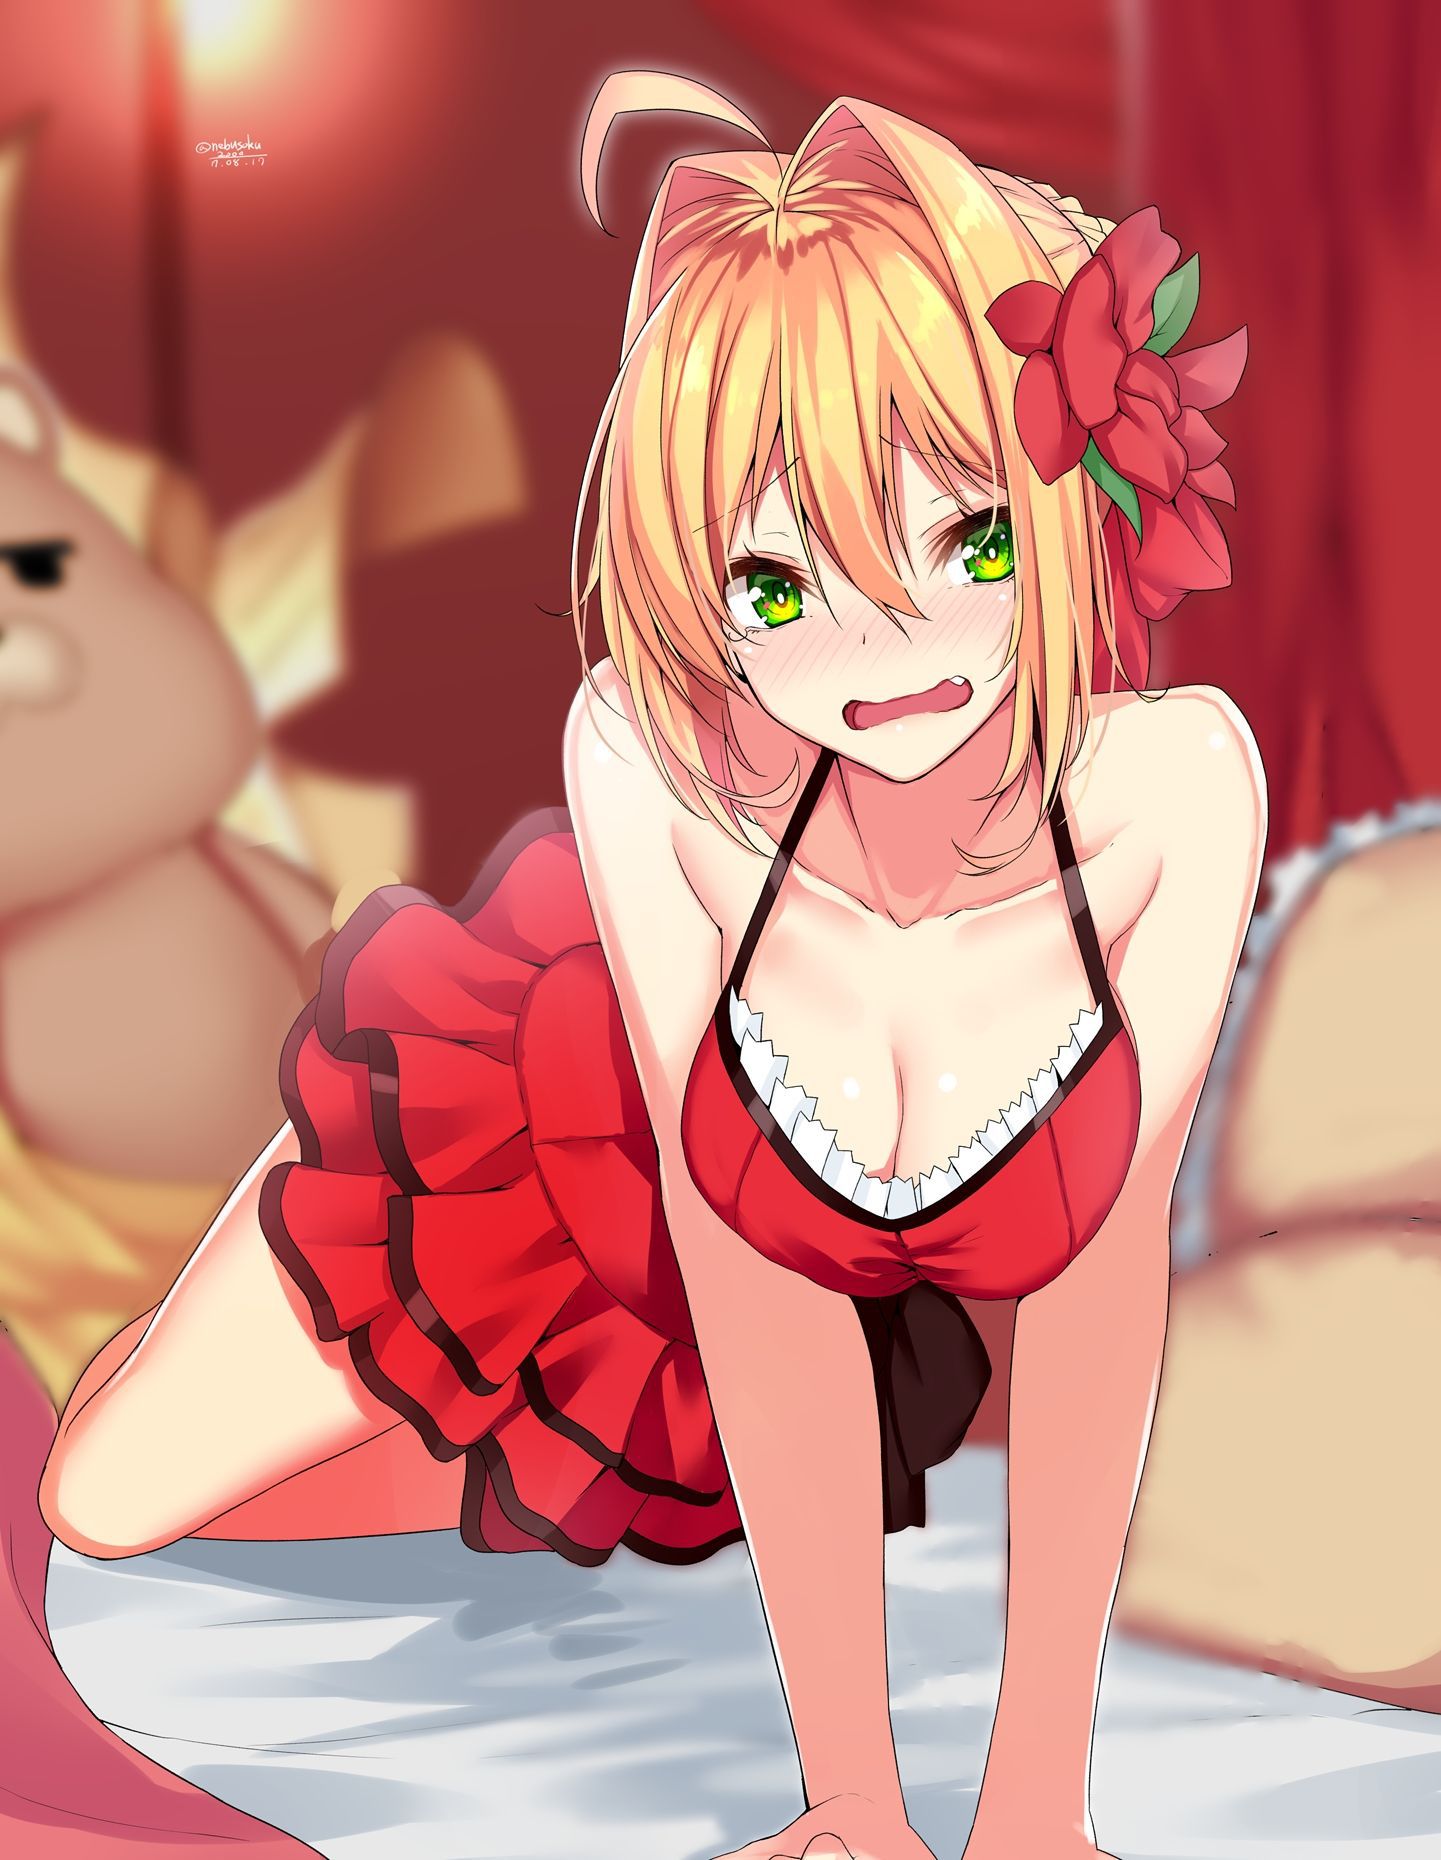 [Secondary ZIP] is about to start anime 100 pieces of cute image summary of Nero Claudius so soon 13